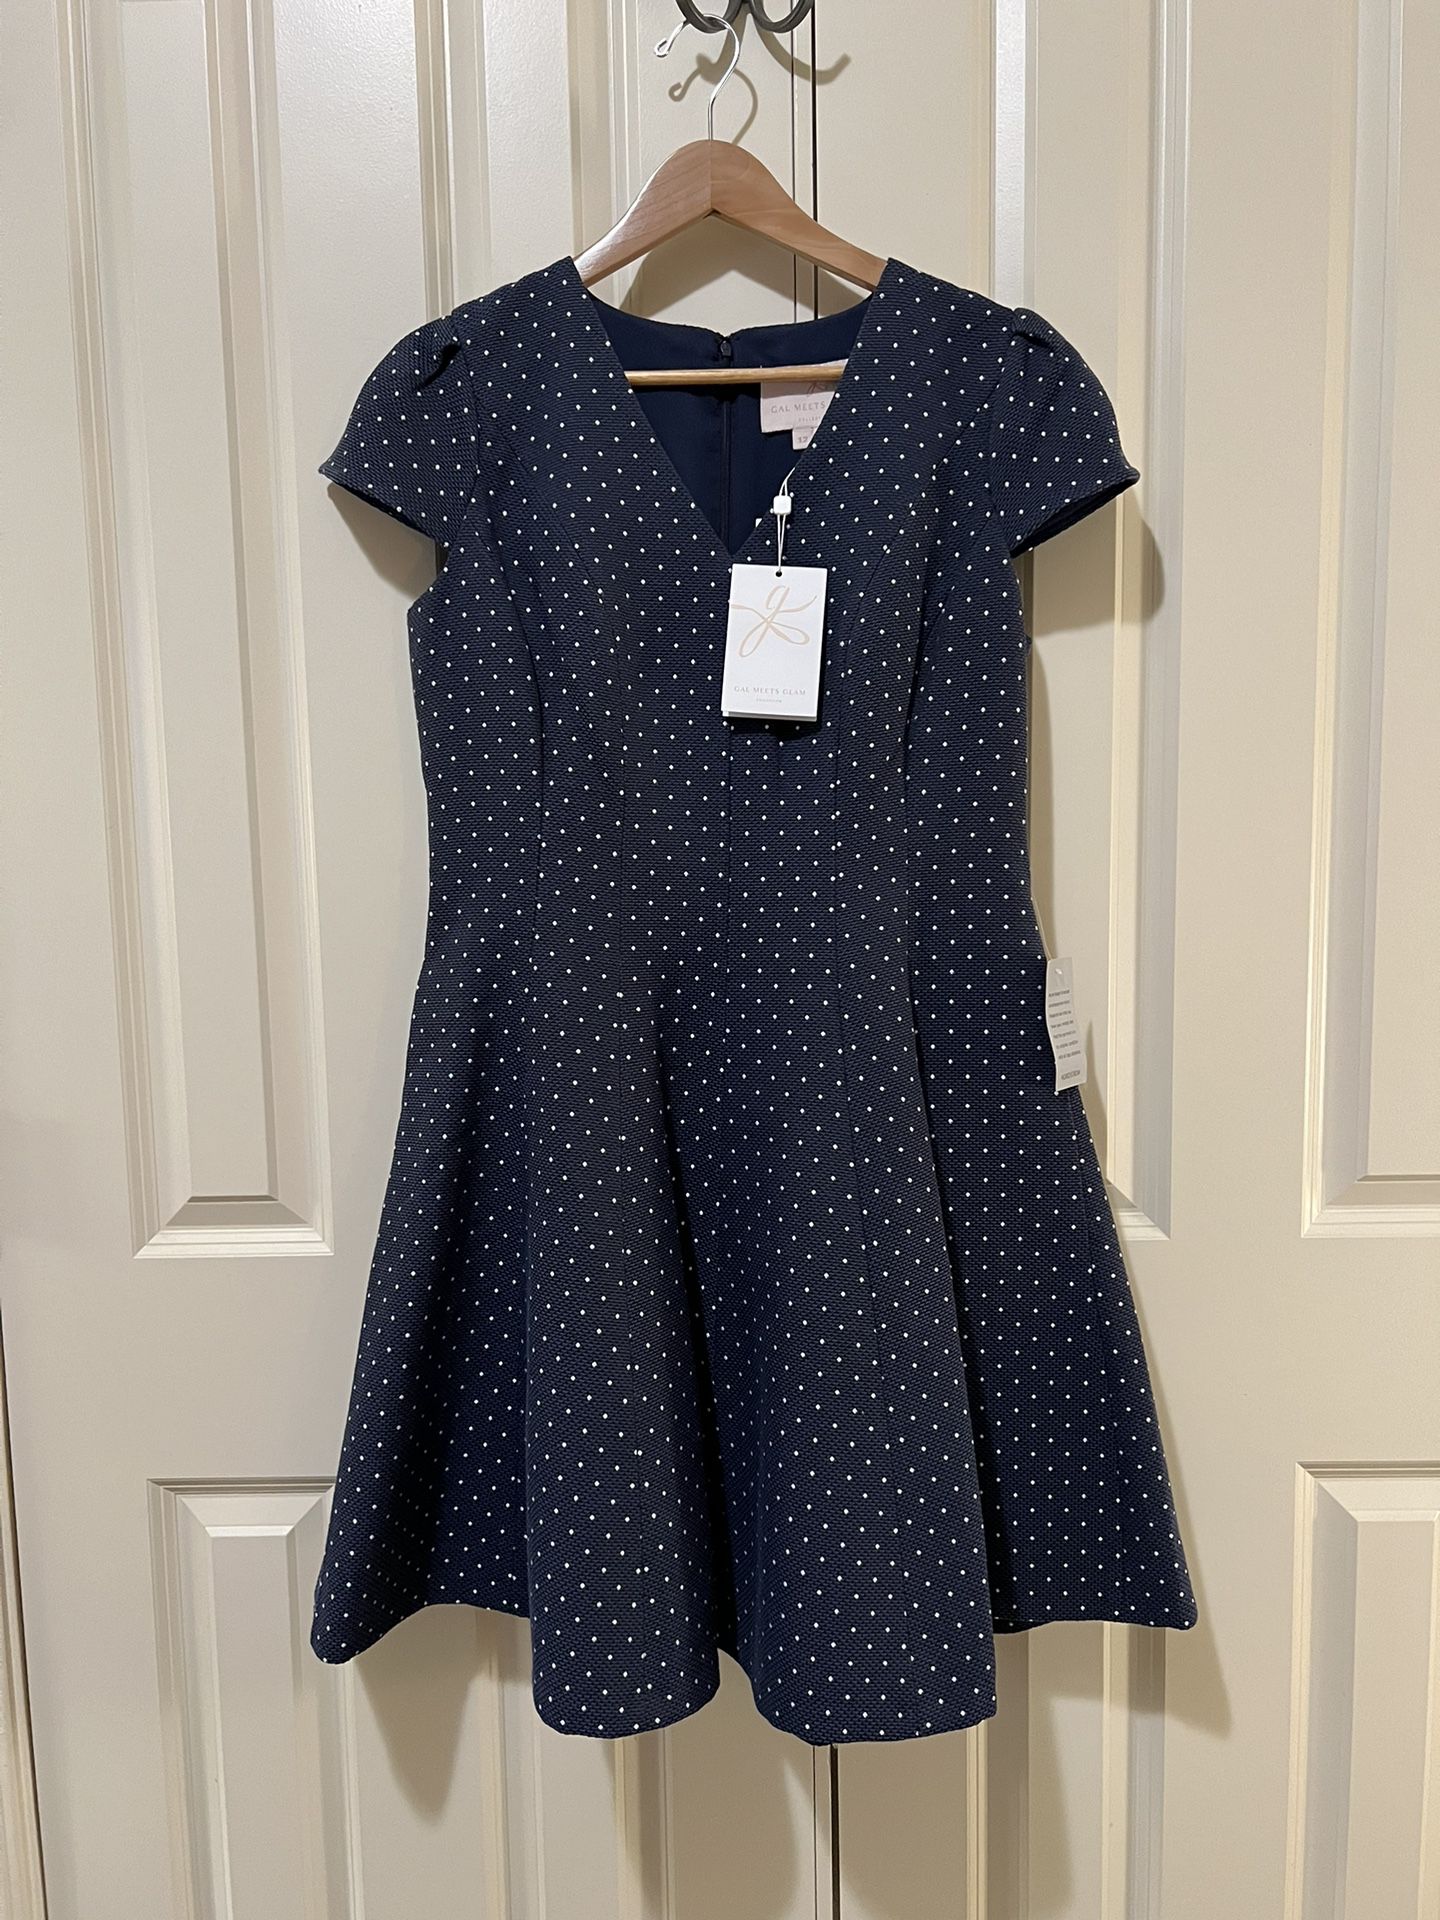 Gal Meets Glam Dress Size 12 Navy Blue w/White Polka Dots New With Tags